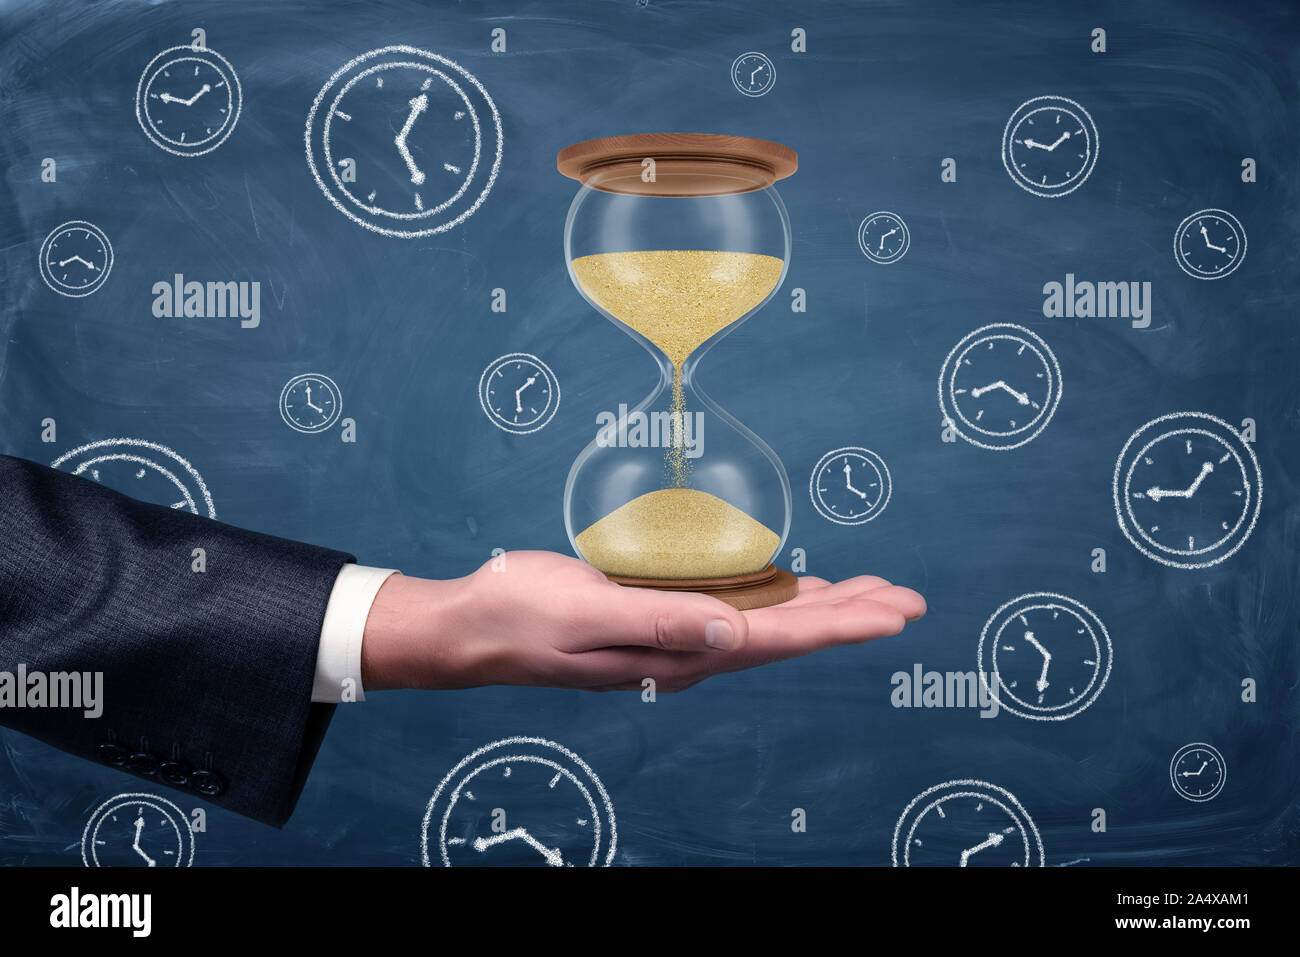 A businessmans hand turned palm up and holds a large functioning hourglass on blue chalkboard background. Stock Photo